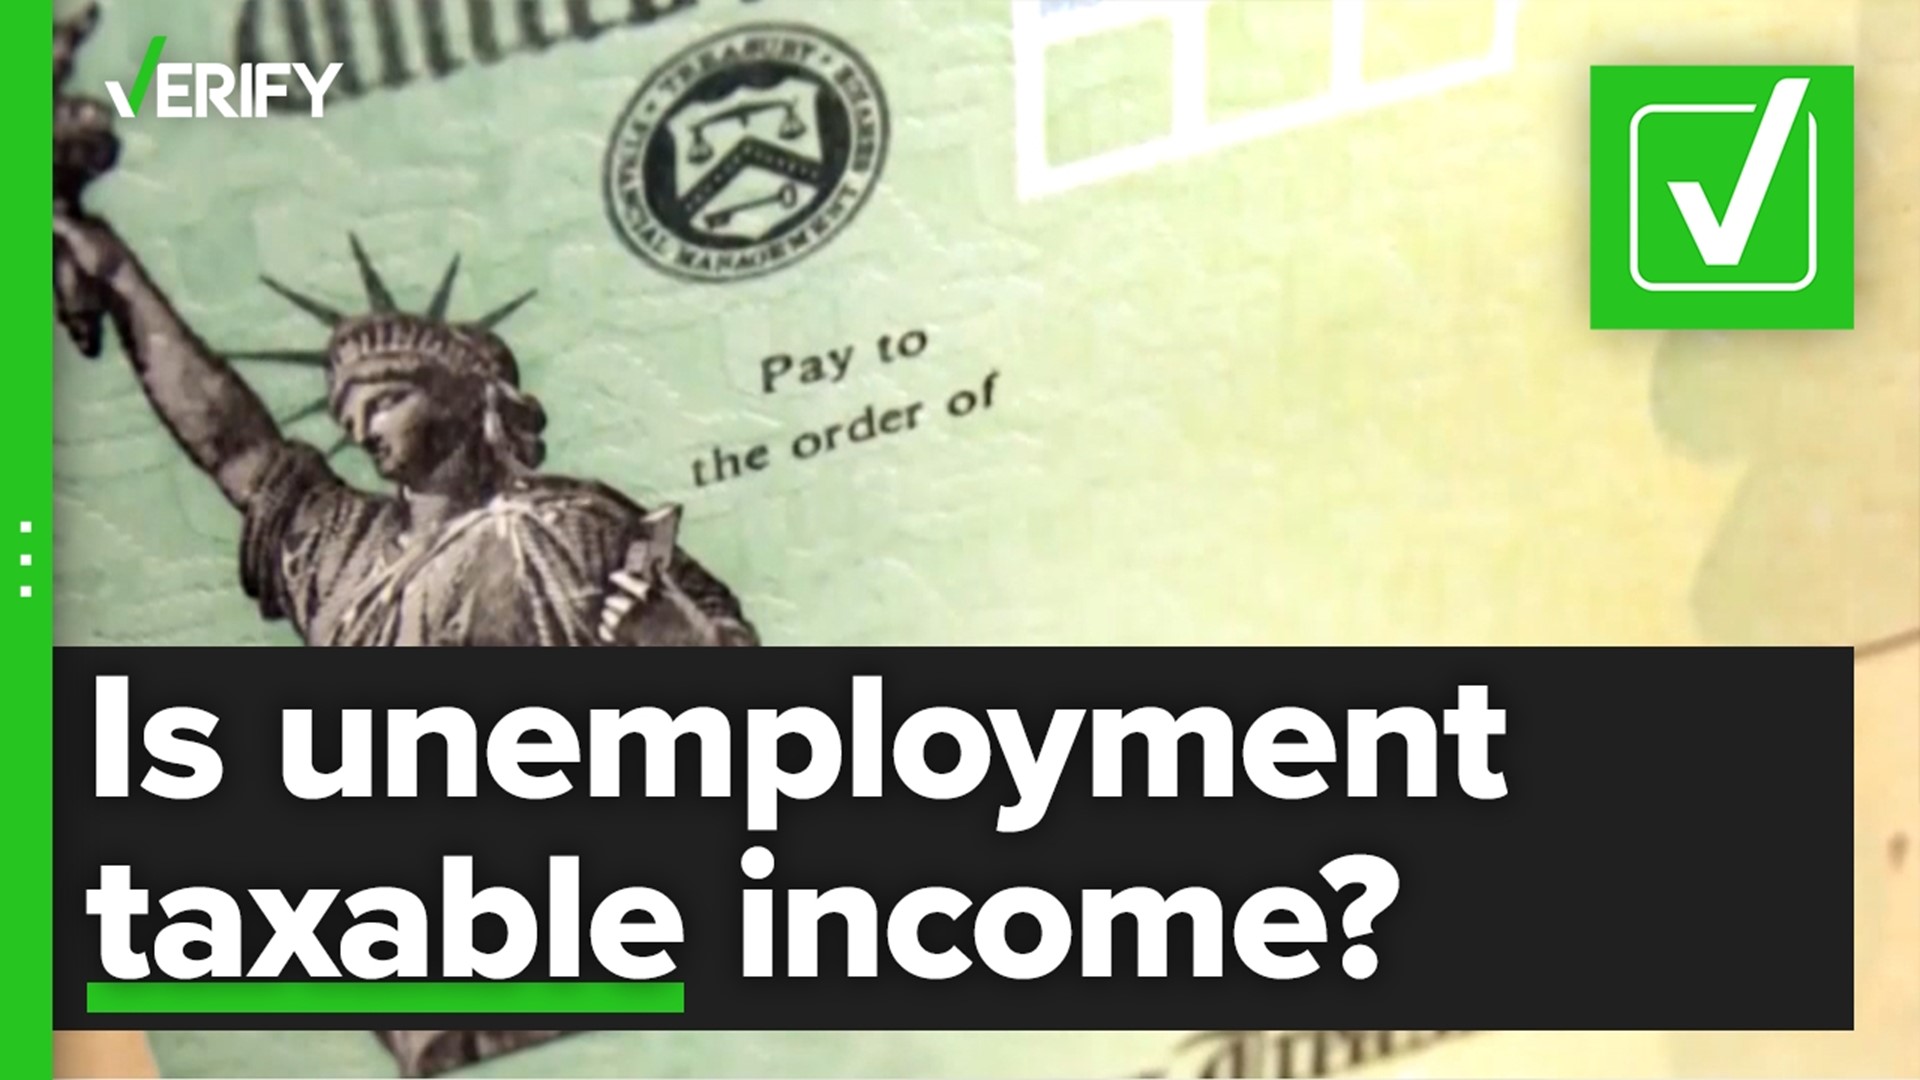 Are unemployment benefits received in 2021 considered federally taxable income? The VERIFY team confirms this is true.